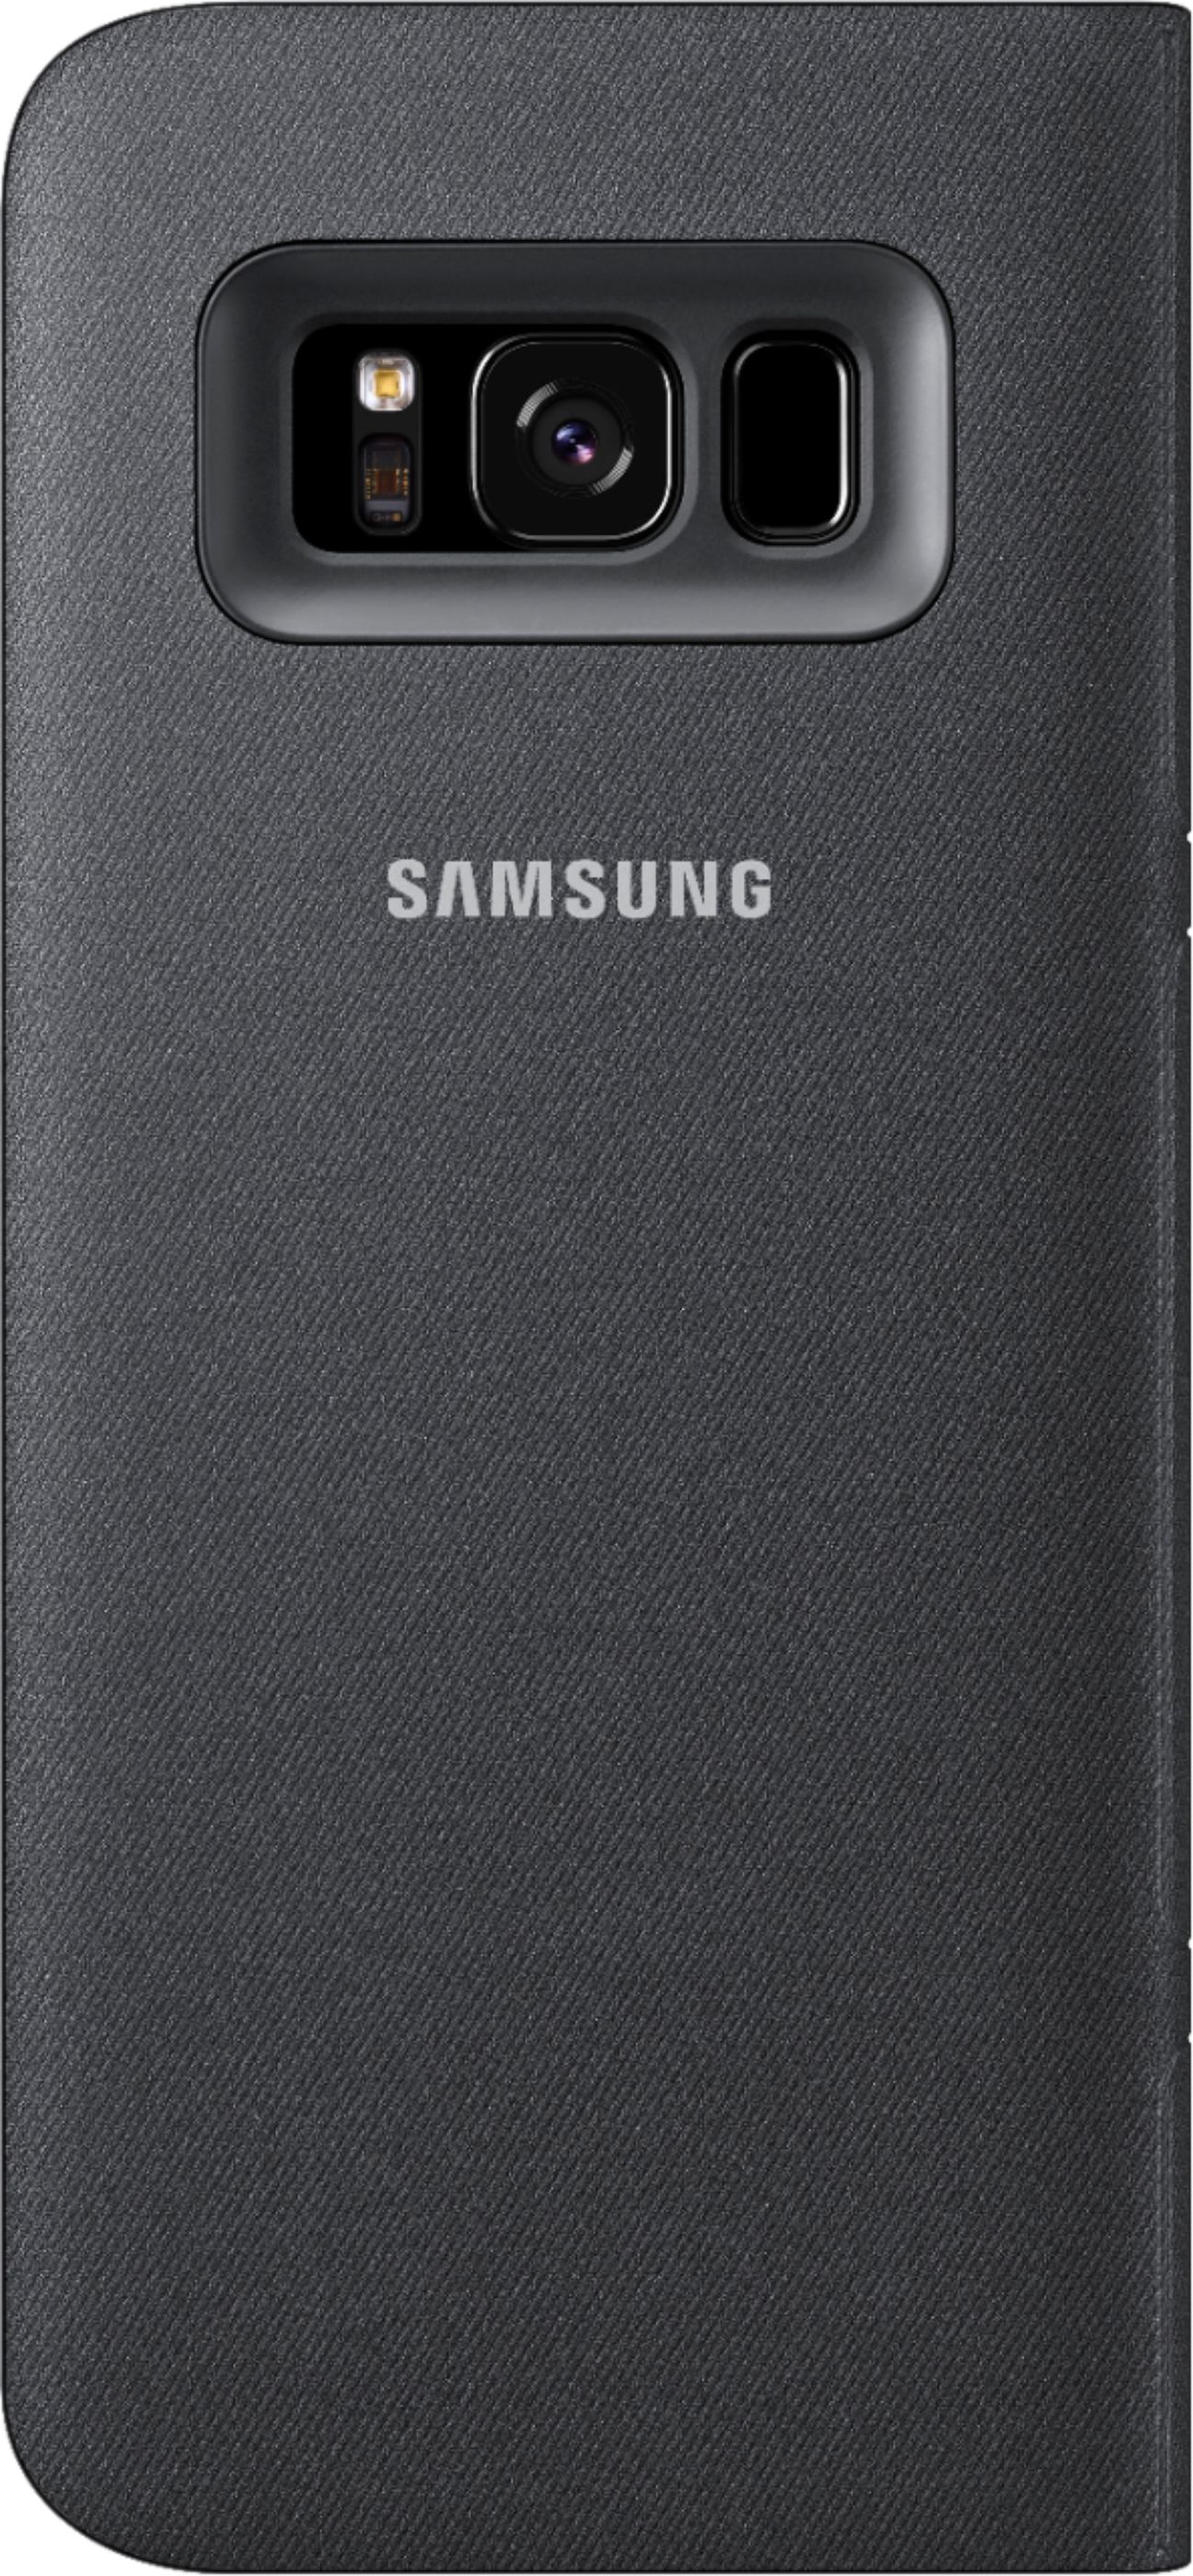 Samsung - LED Wallet Cover for Samsung Galaxy S8+ - Black